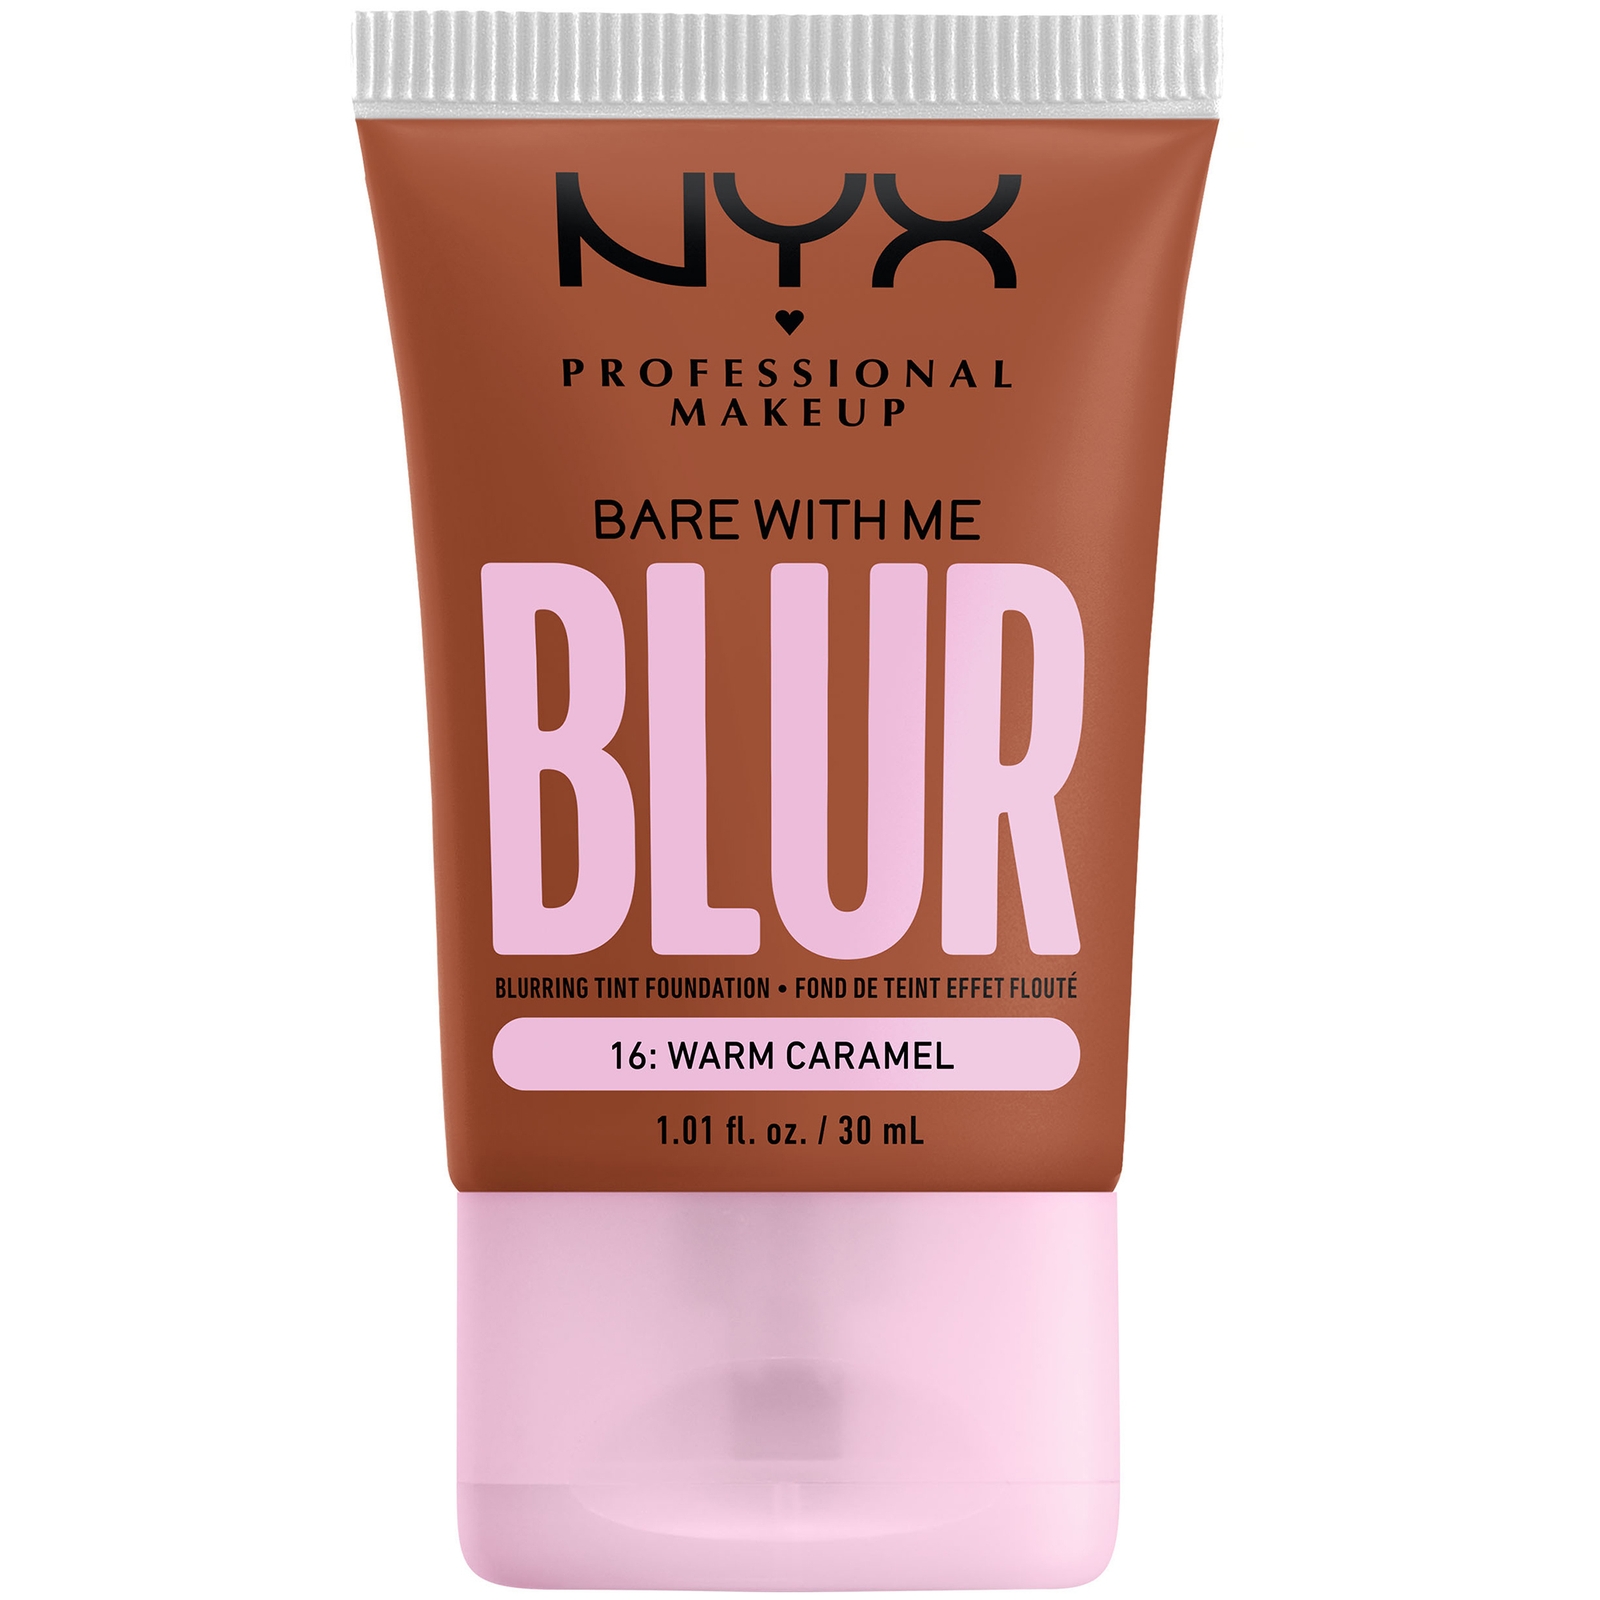 Nyx Professional Makeup Bare With Me Blur Tint Foundation 30ml (varios Shades) - Warm Caramel In White